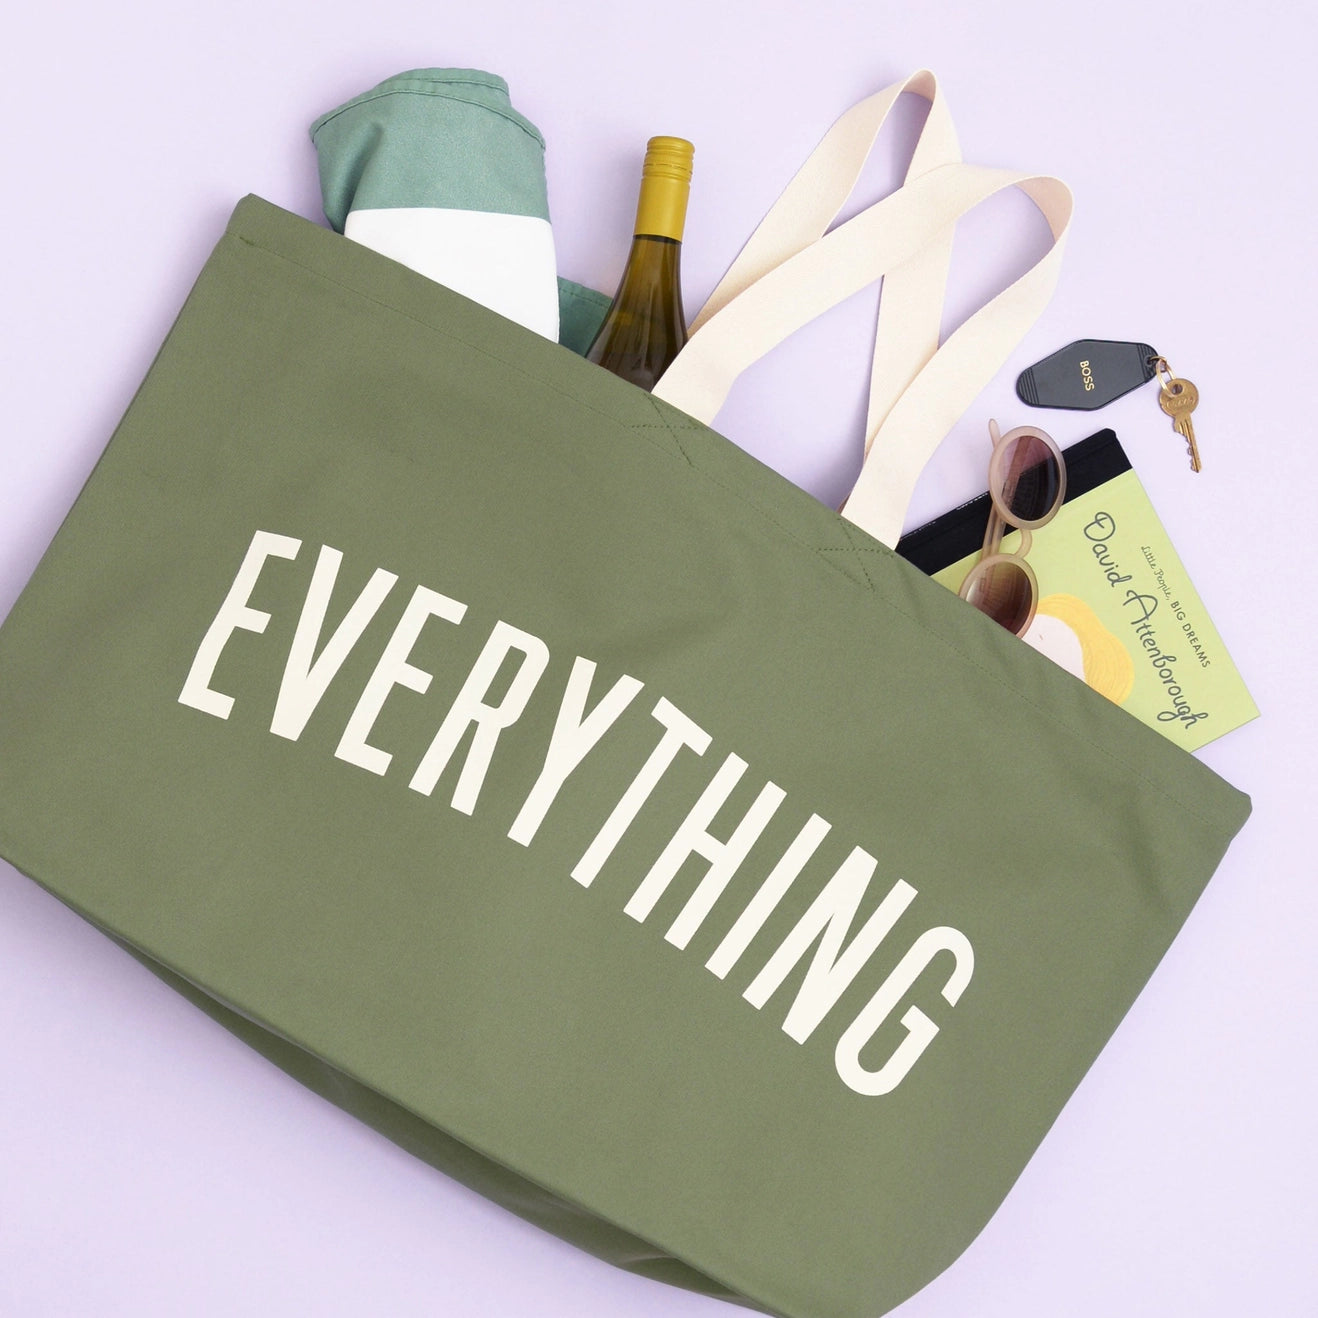 Everything Really Big Canvas Tote Bag - Olive Green